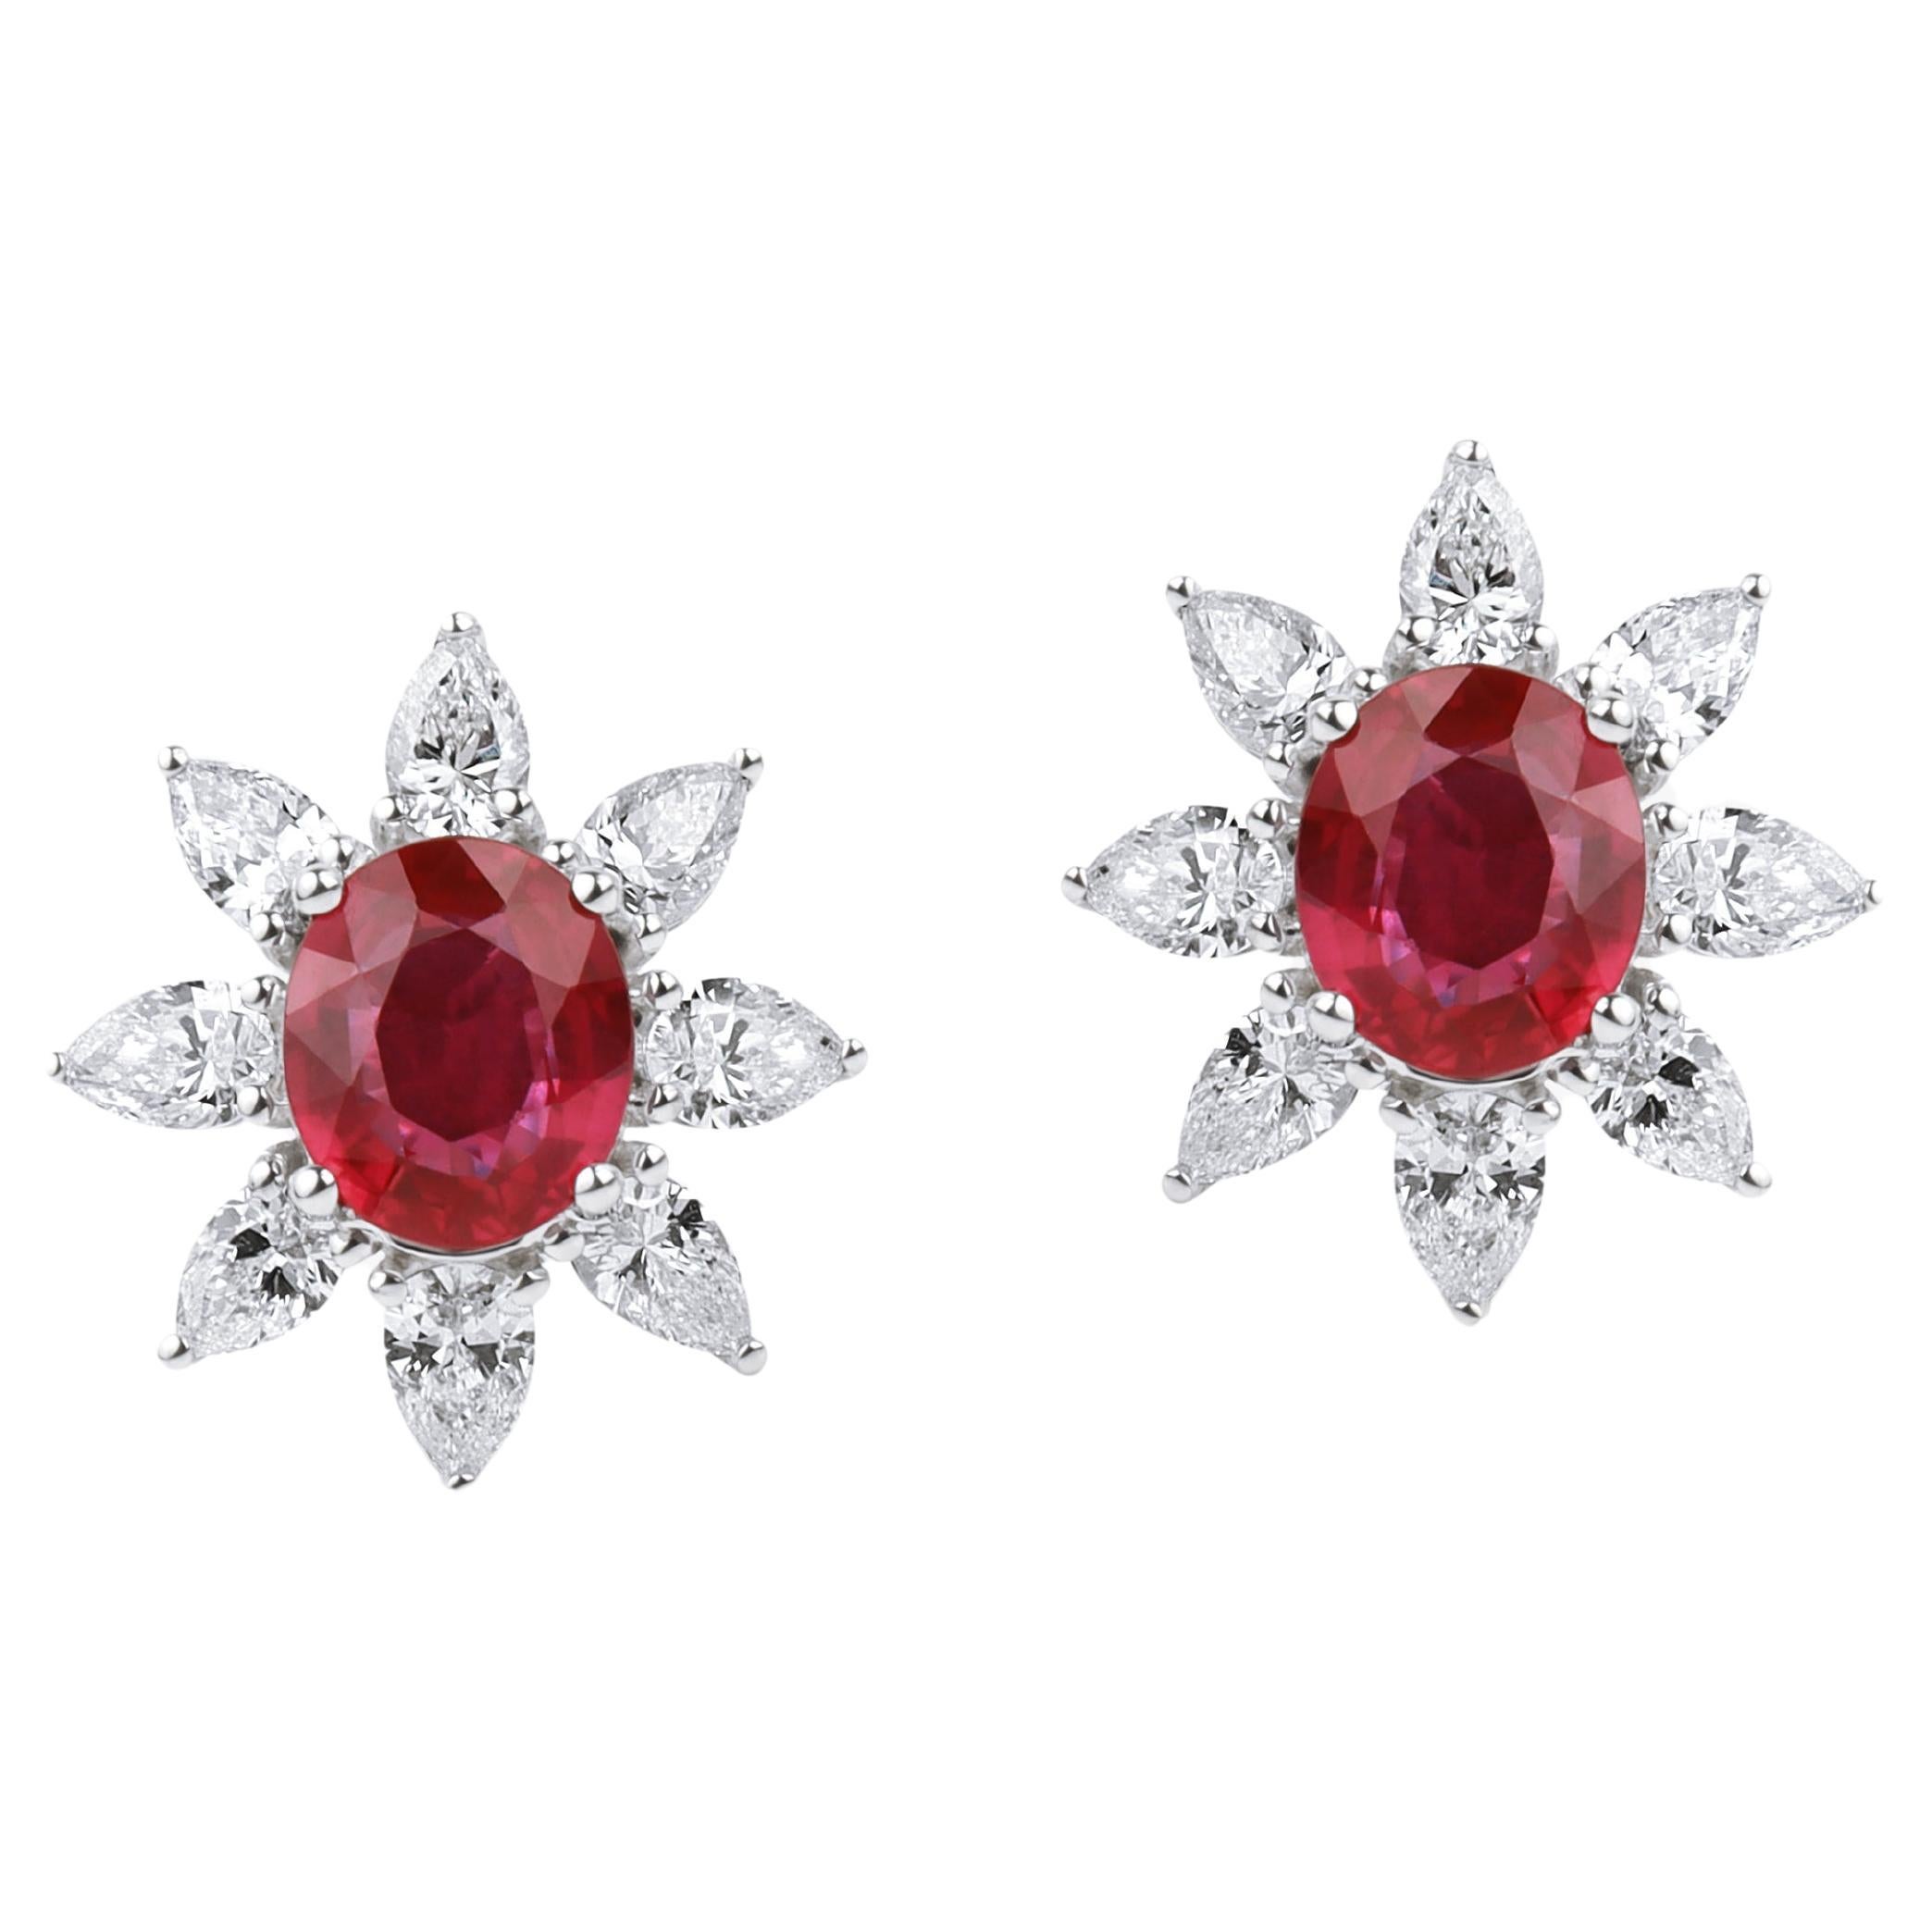 Exceptional oval natural ruby diamond stud earrings, halo diamond in 18k gold